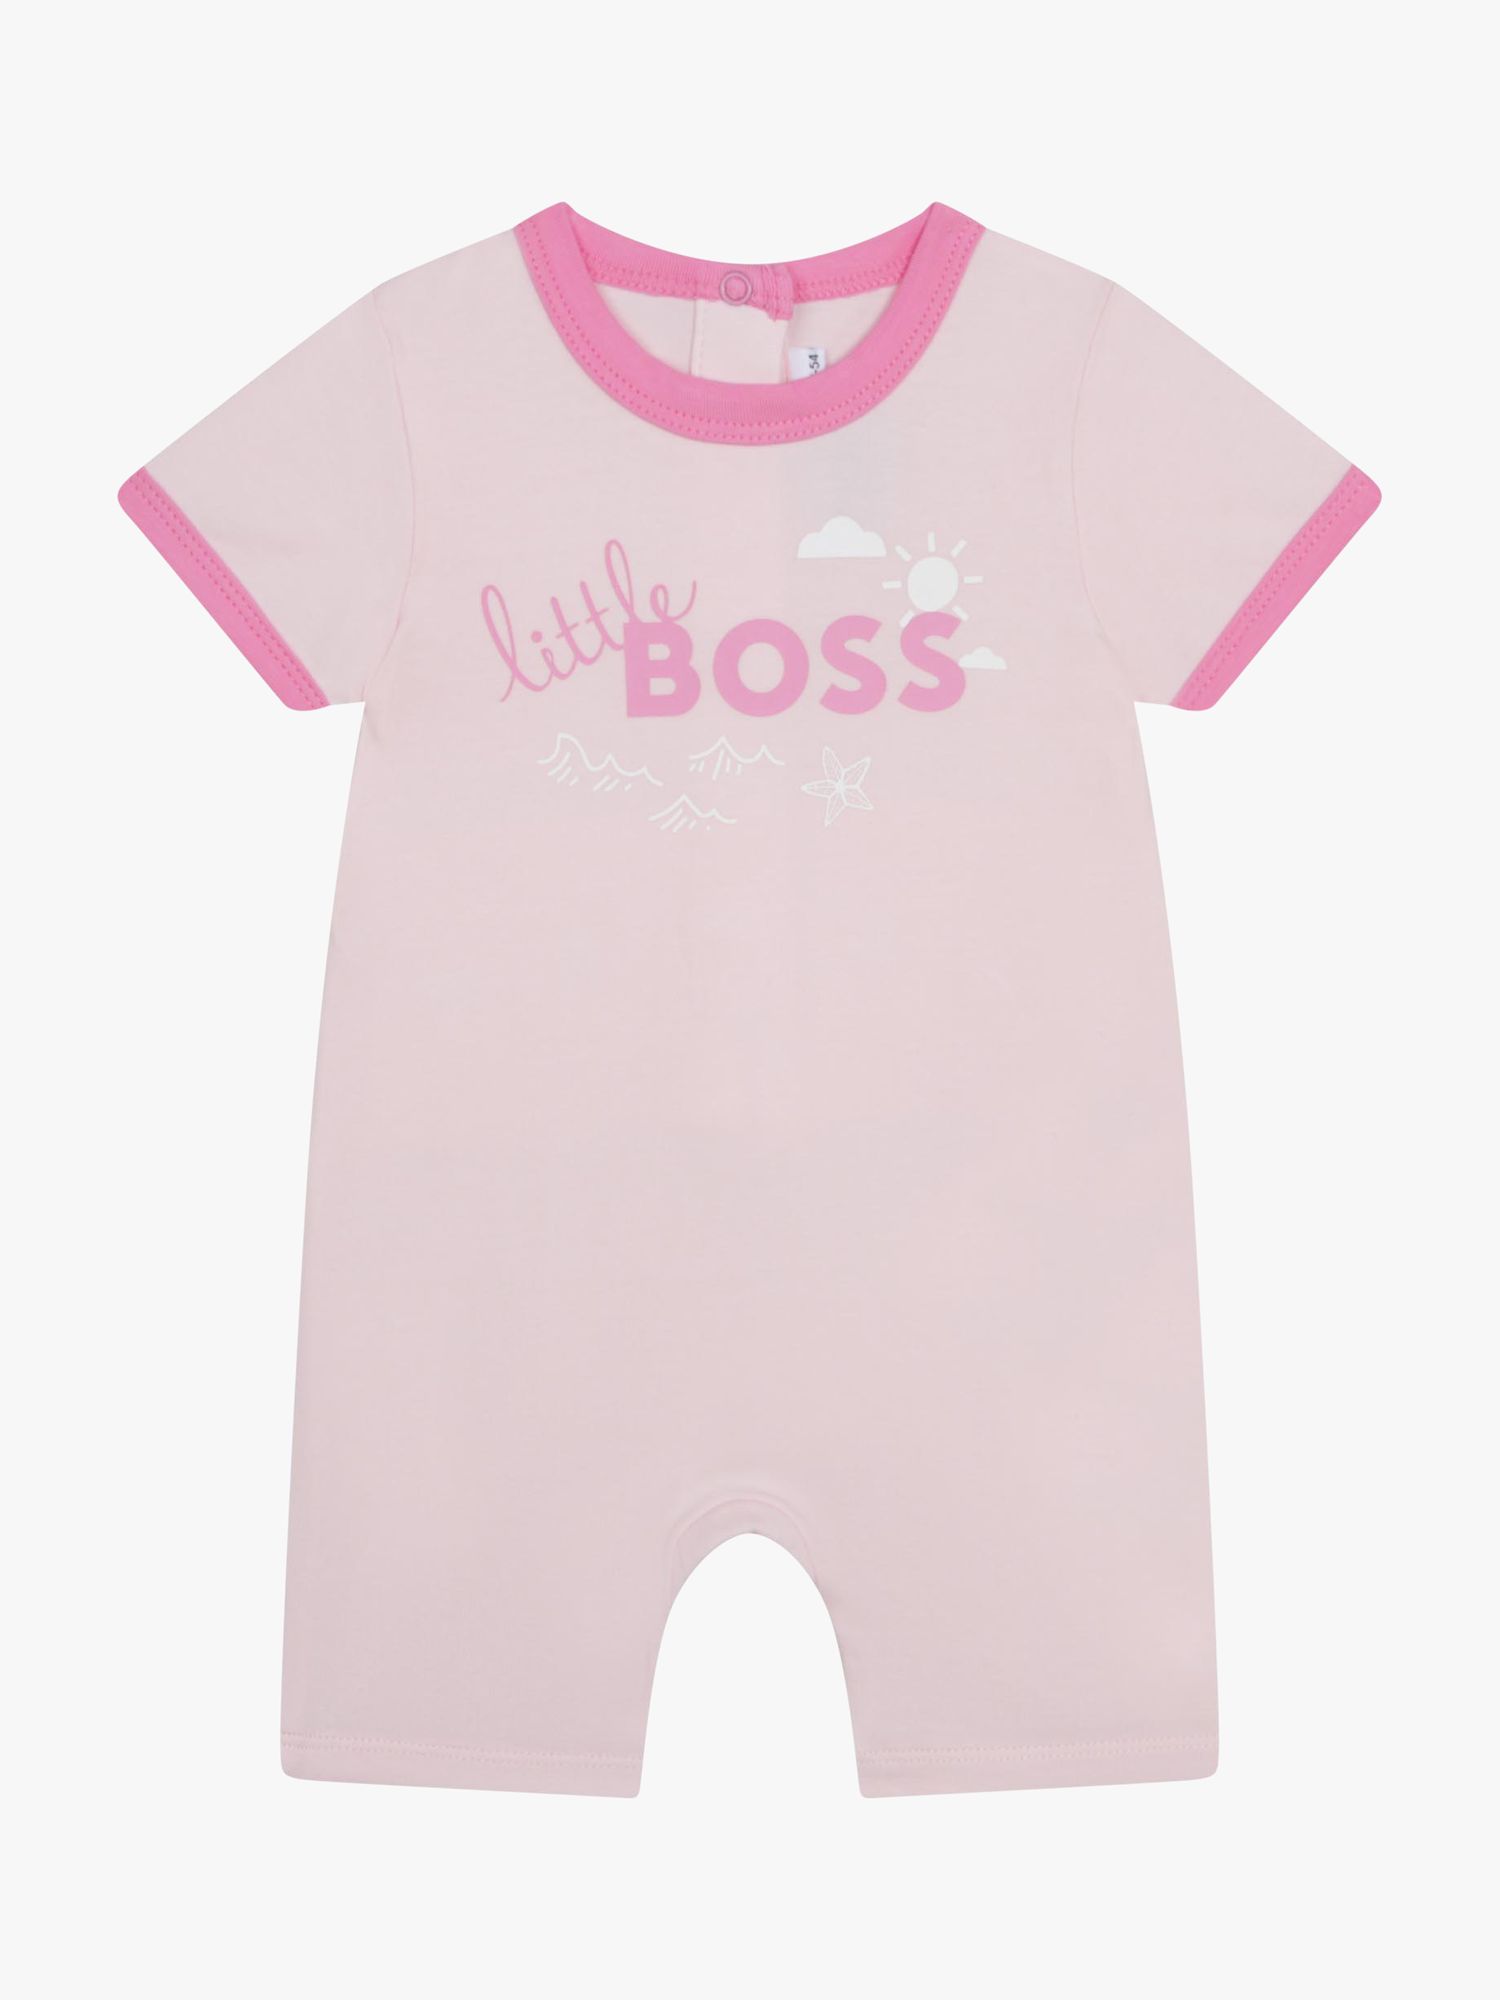 HUGO BOSS Baby All In One, Pink 12 months Unisex